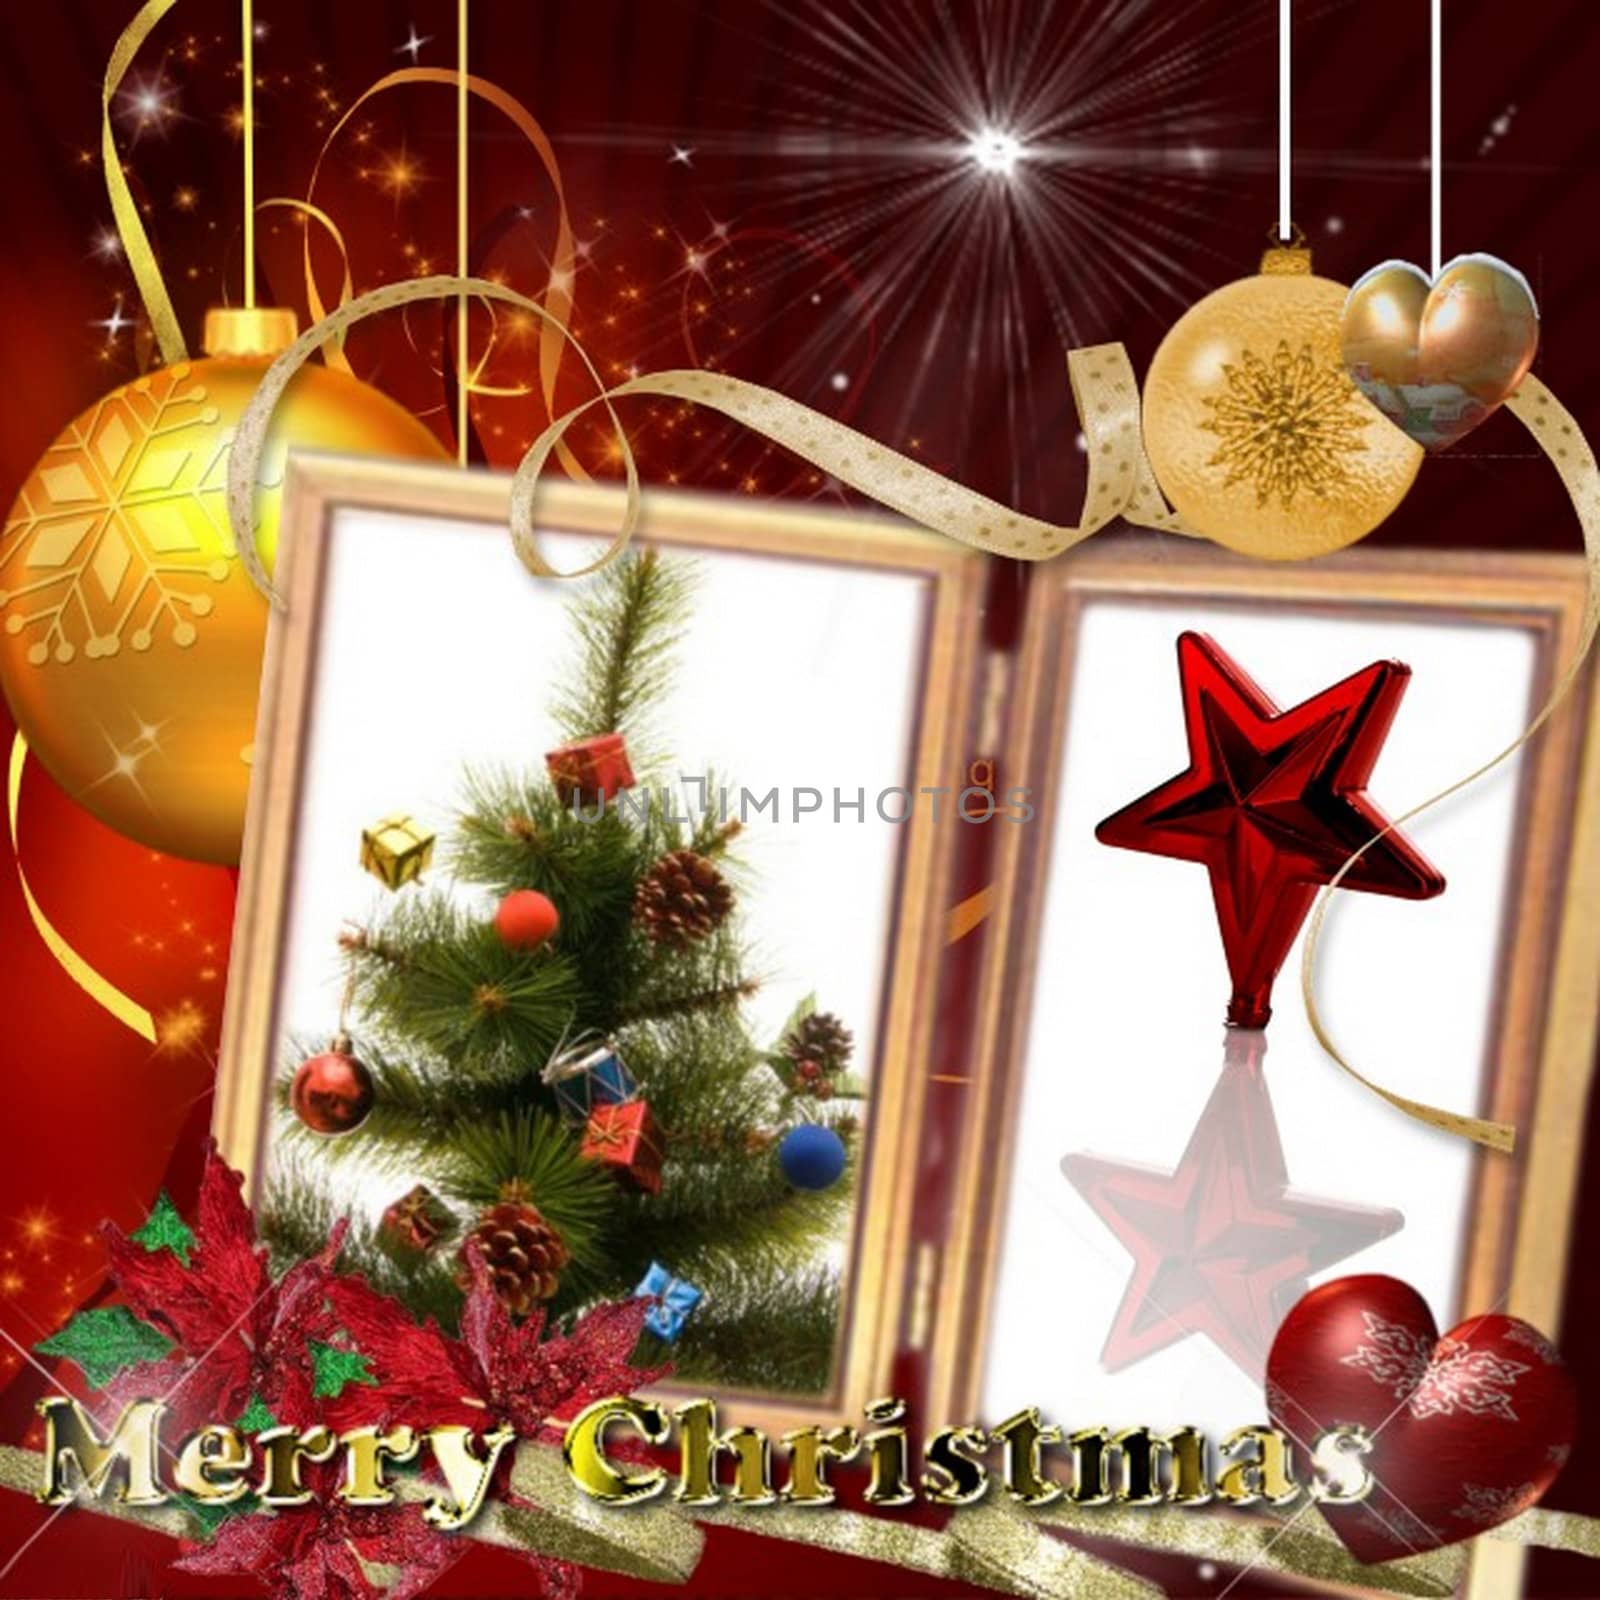 Merry Christmas collage by Baltus